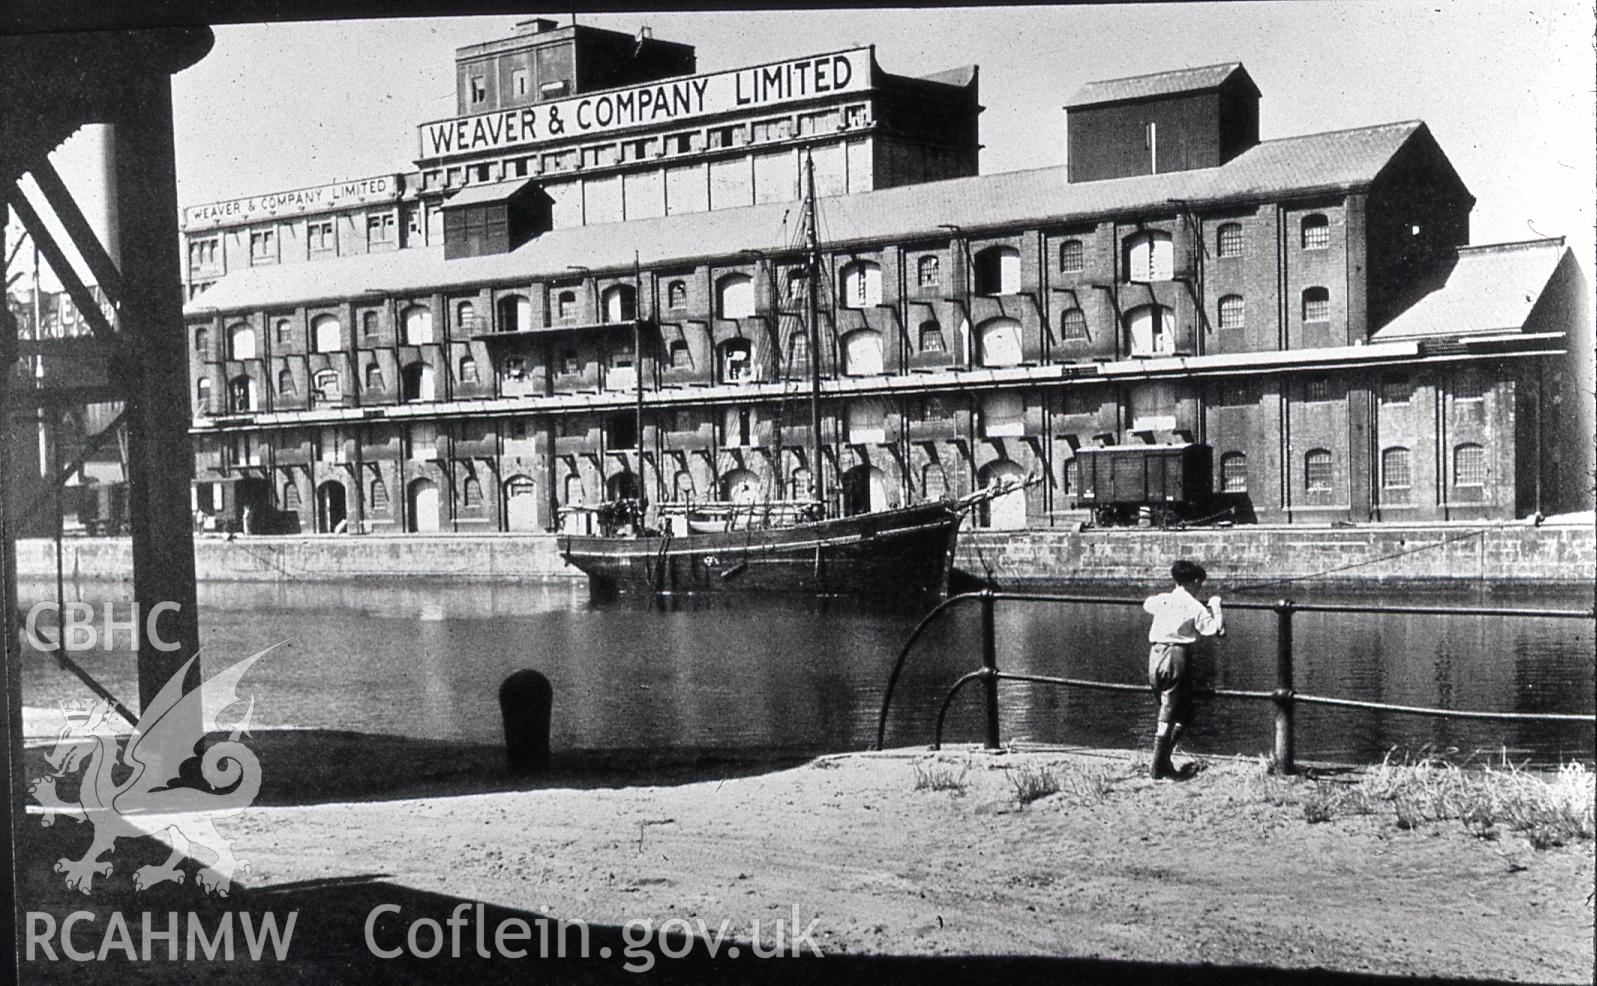 Digital copy of postcard showing Weavers Flour Mill, Victoria Wharf, Swansea, dated 1949.